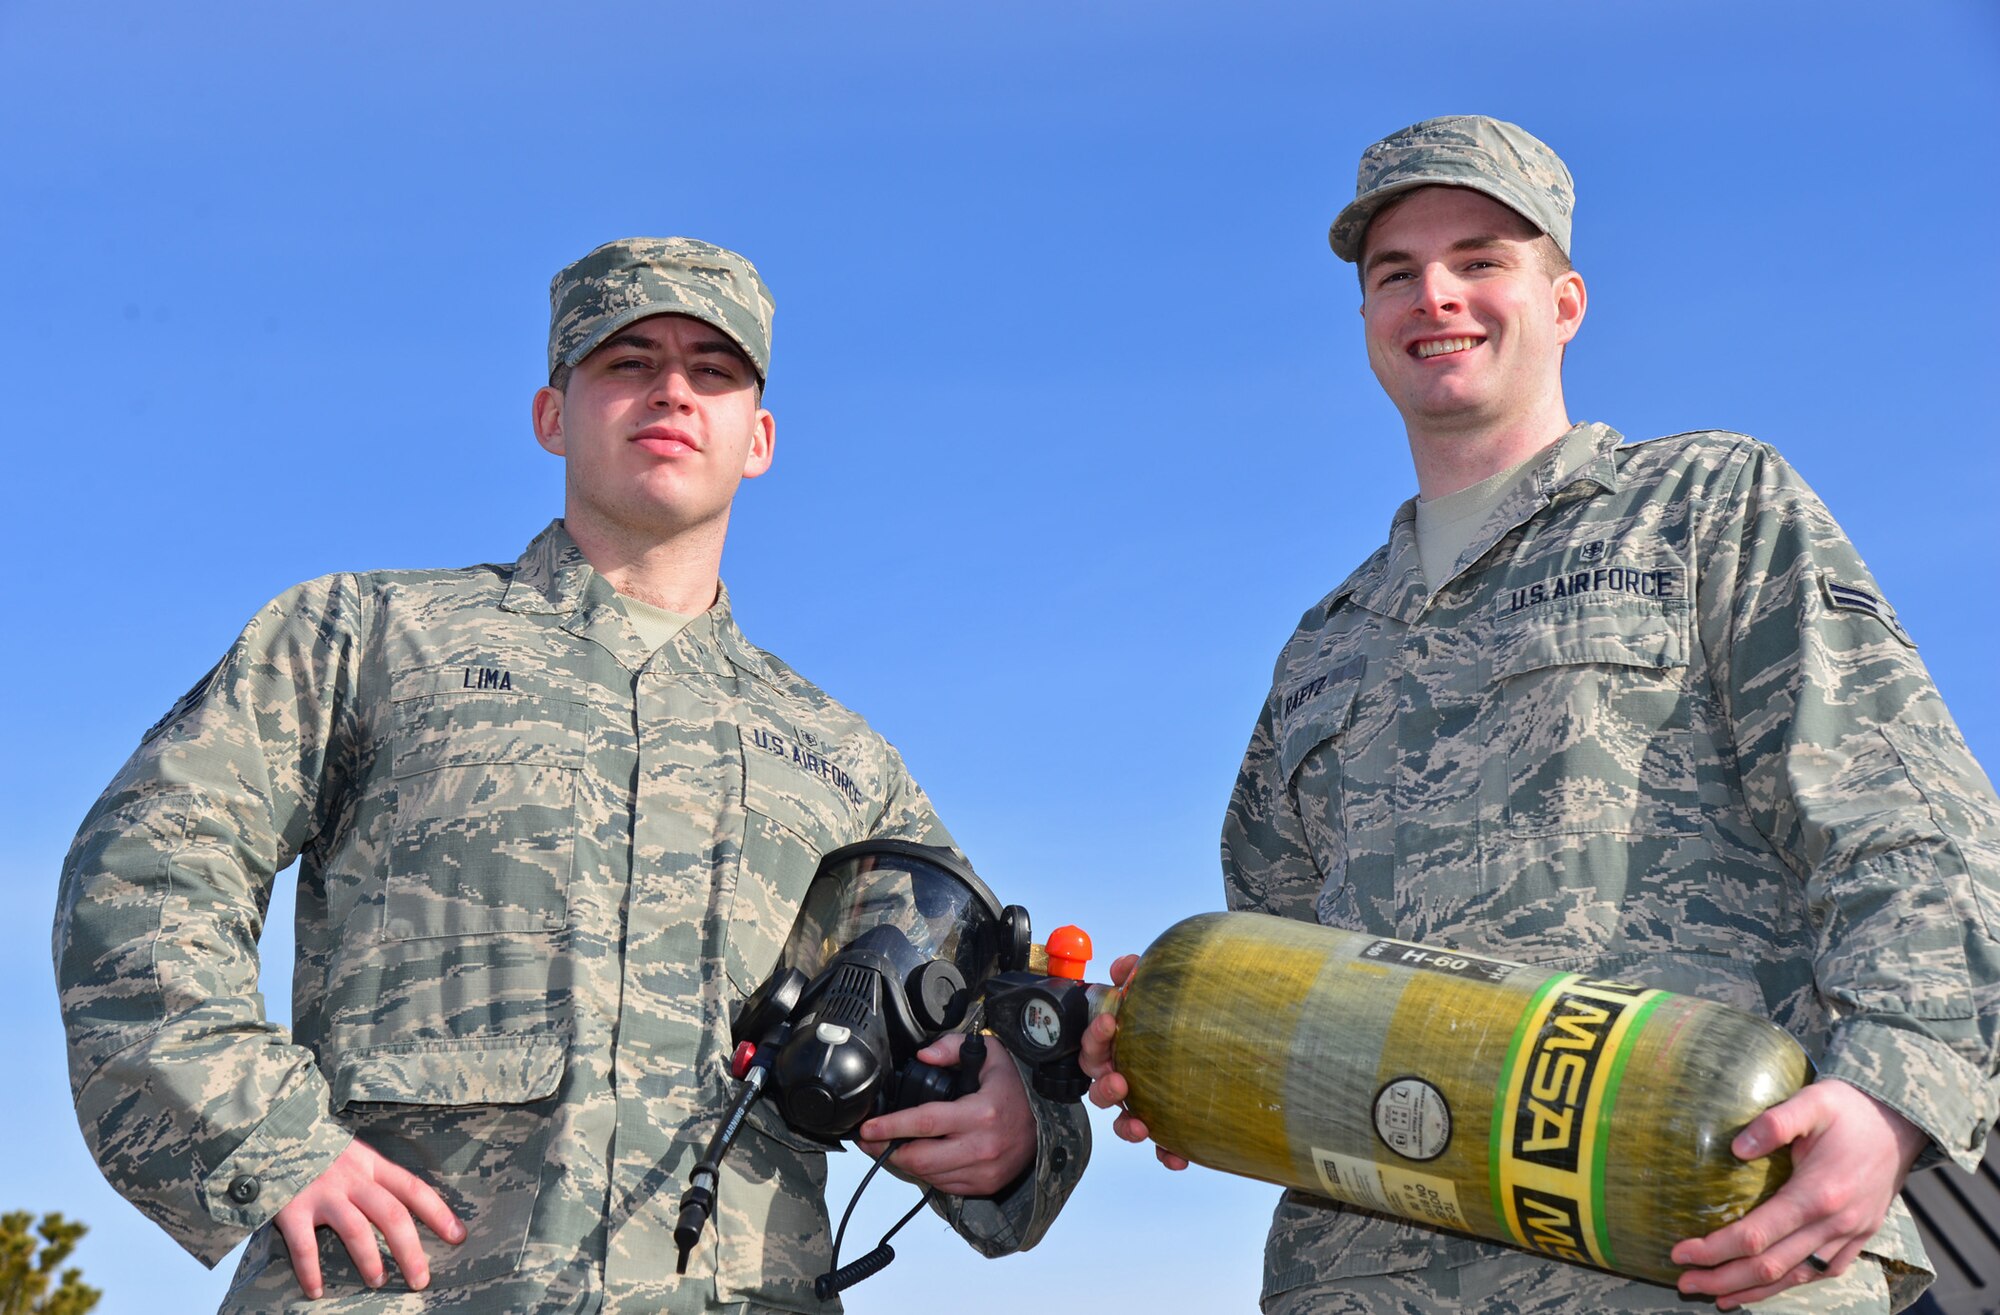 Senior Airman Kyle Lima, left, and Airman 1st Class William Raetz, 341st Medical Operations Squadron bioenvironmental engineering technicians, showcase their equipment Jan. 25, 2016, at Malmstrom Air Force Base, Mont. Lima and Raetz are part of a team of Airmen who are responsible for assessing and responding to hazards at the base. (U.S. Air Force photo/Airman Daniel Brosam)